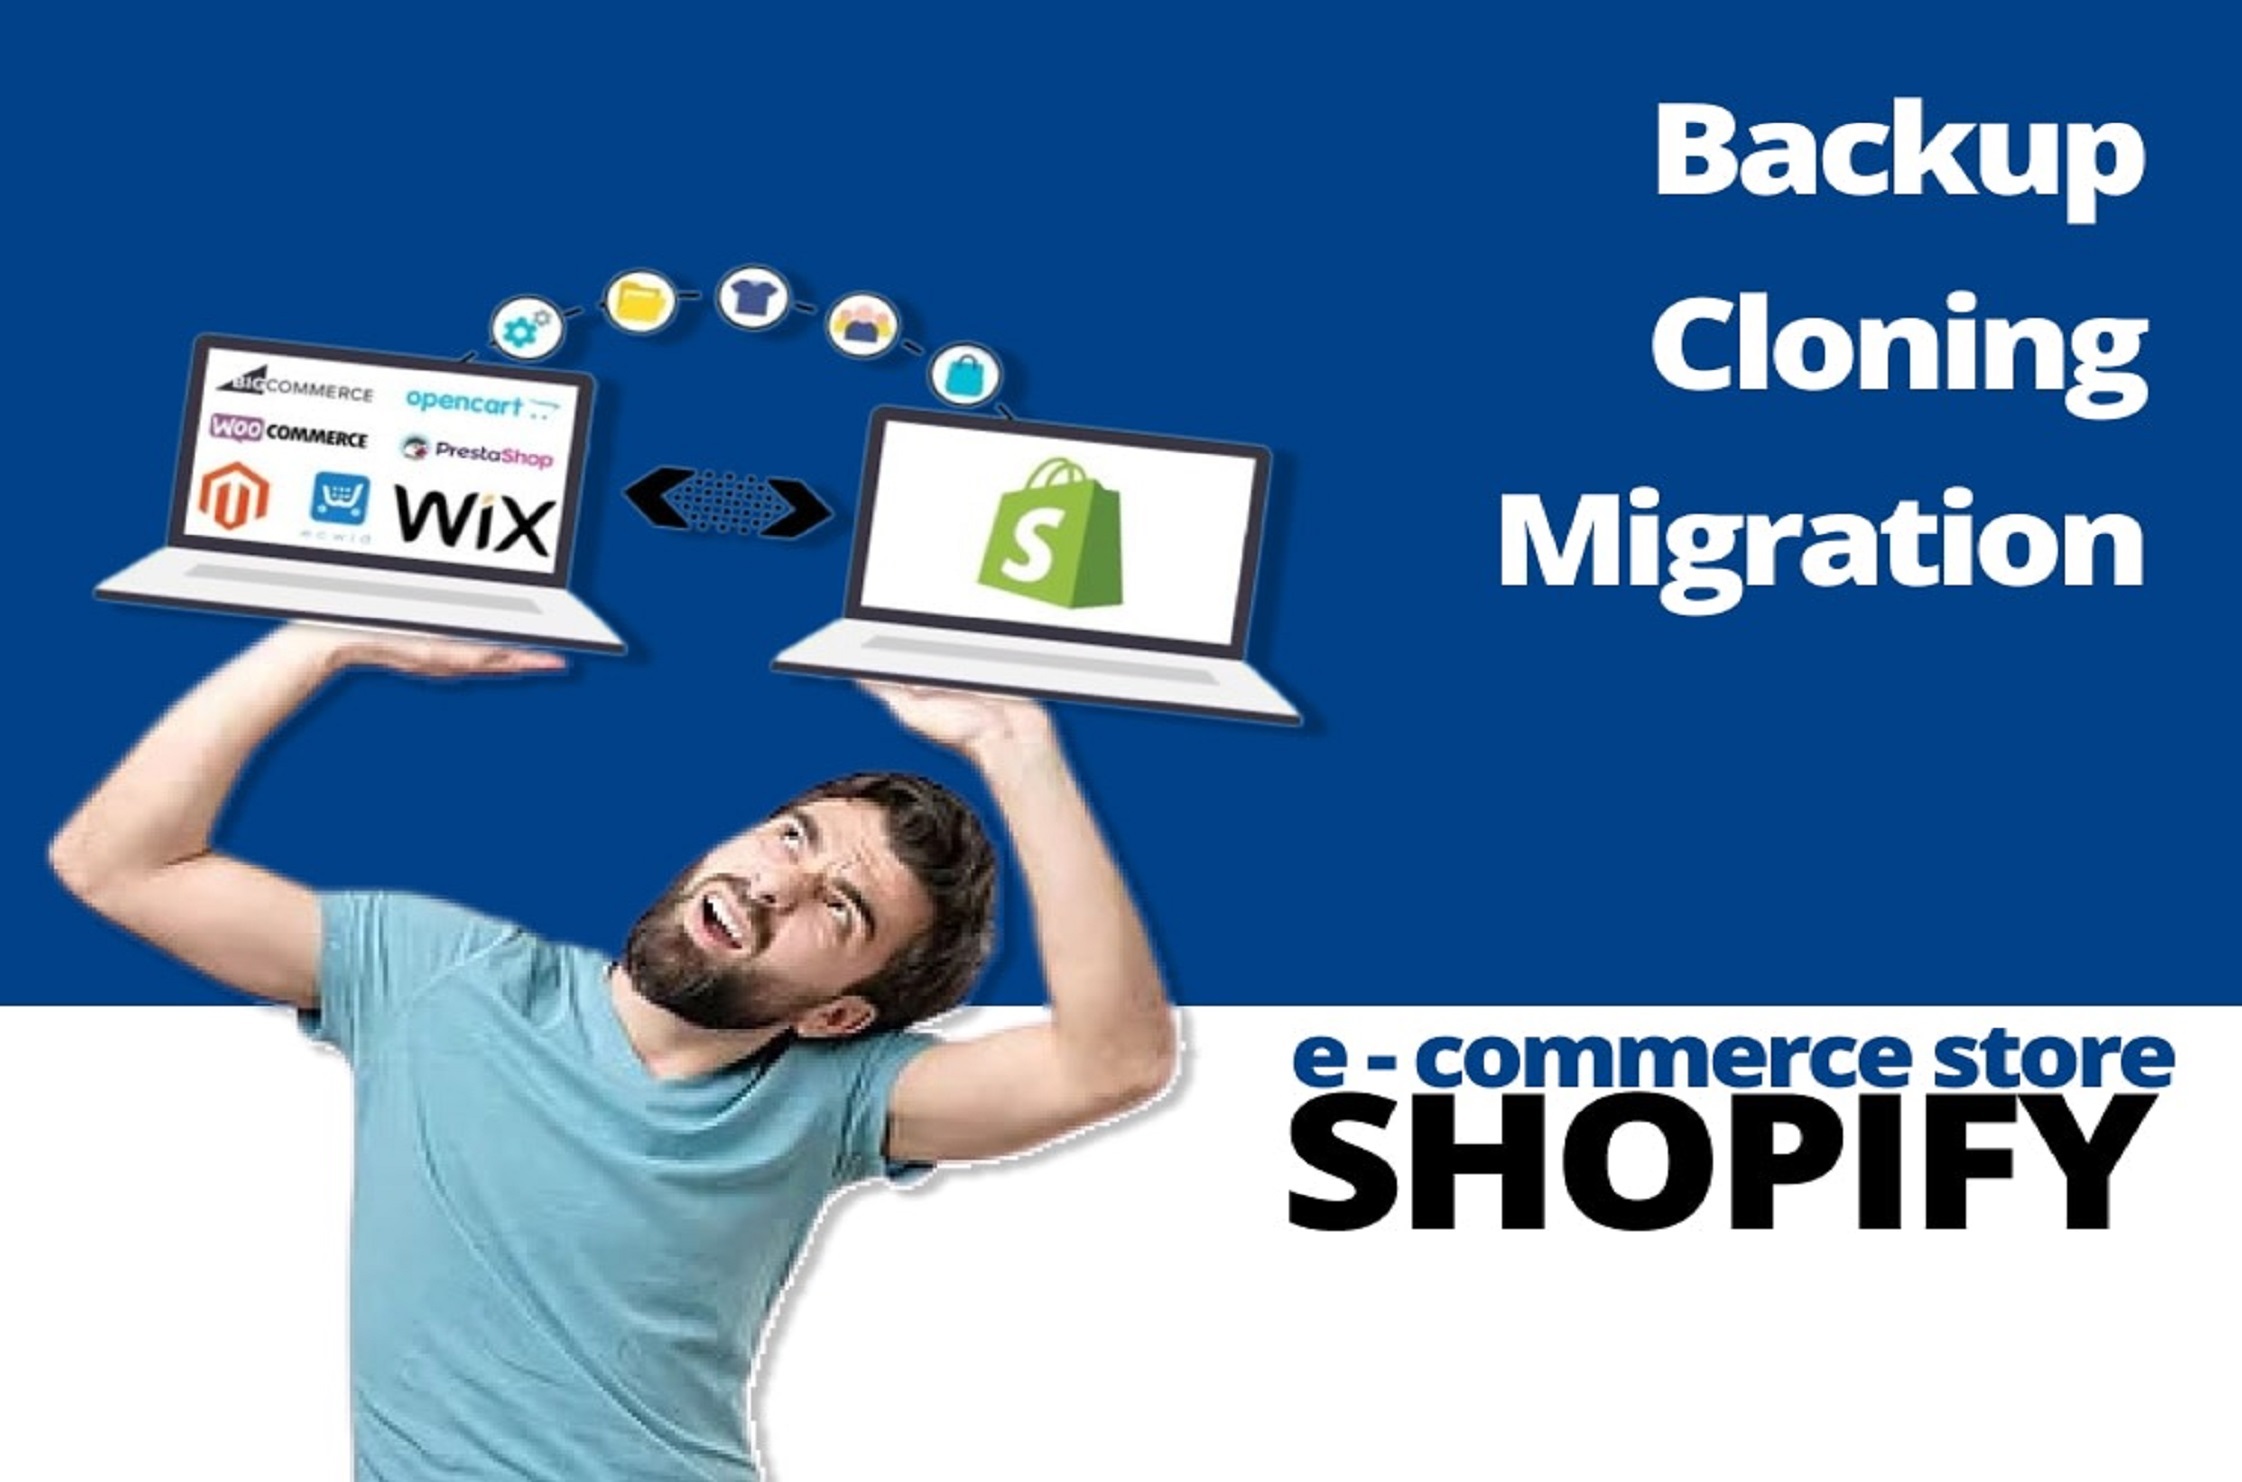 Shopify Store Backups and Duplication, Migration Services